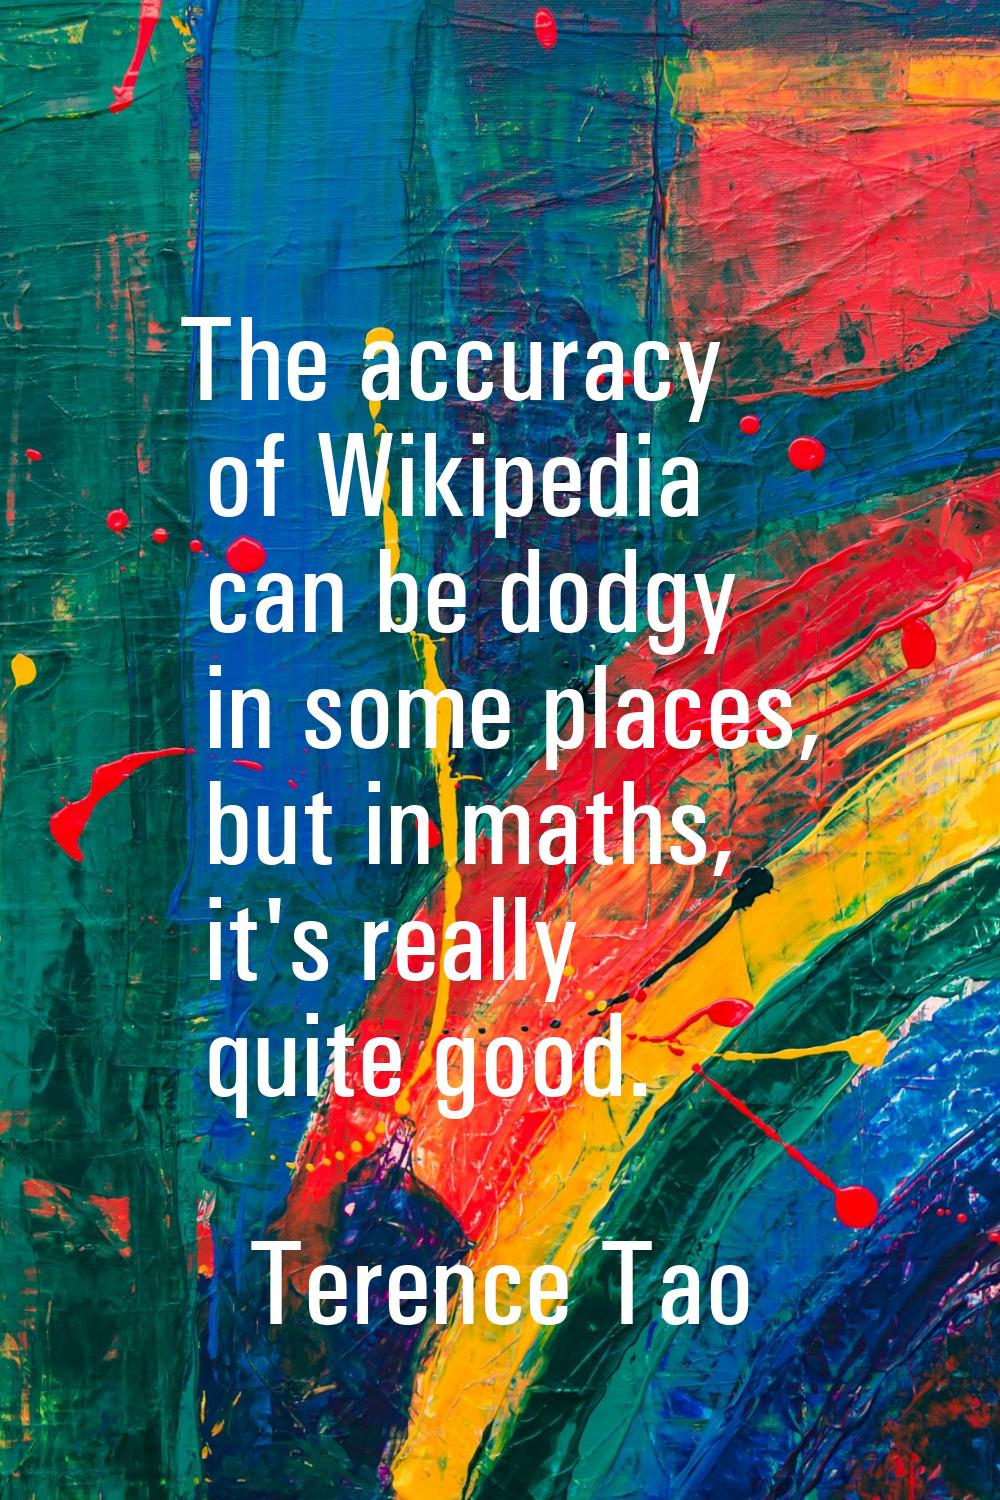 The accuracy of Wikipedia can be dodgy in some places, but in maths, it's really quite good.